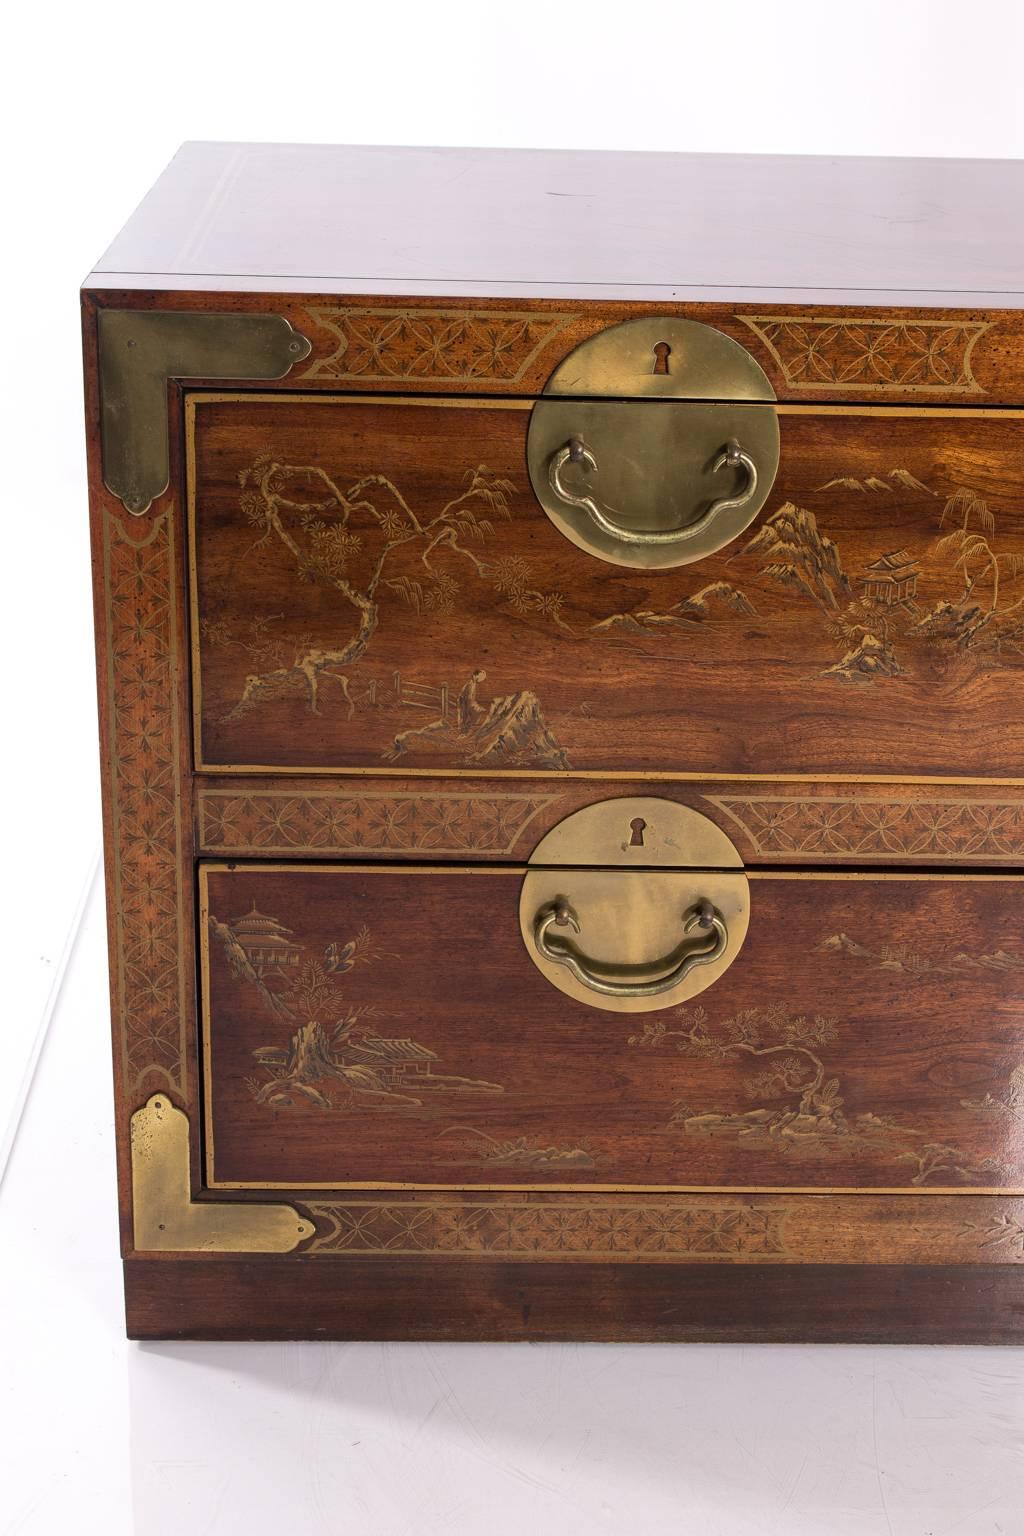 Two-drawer chinoiserie low chest with brass hardware. Several minor scratches on the side.